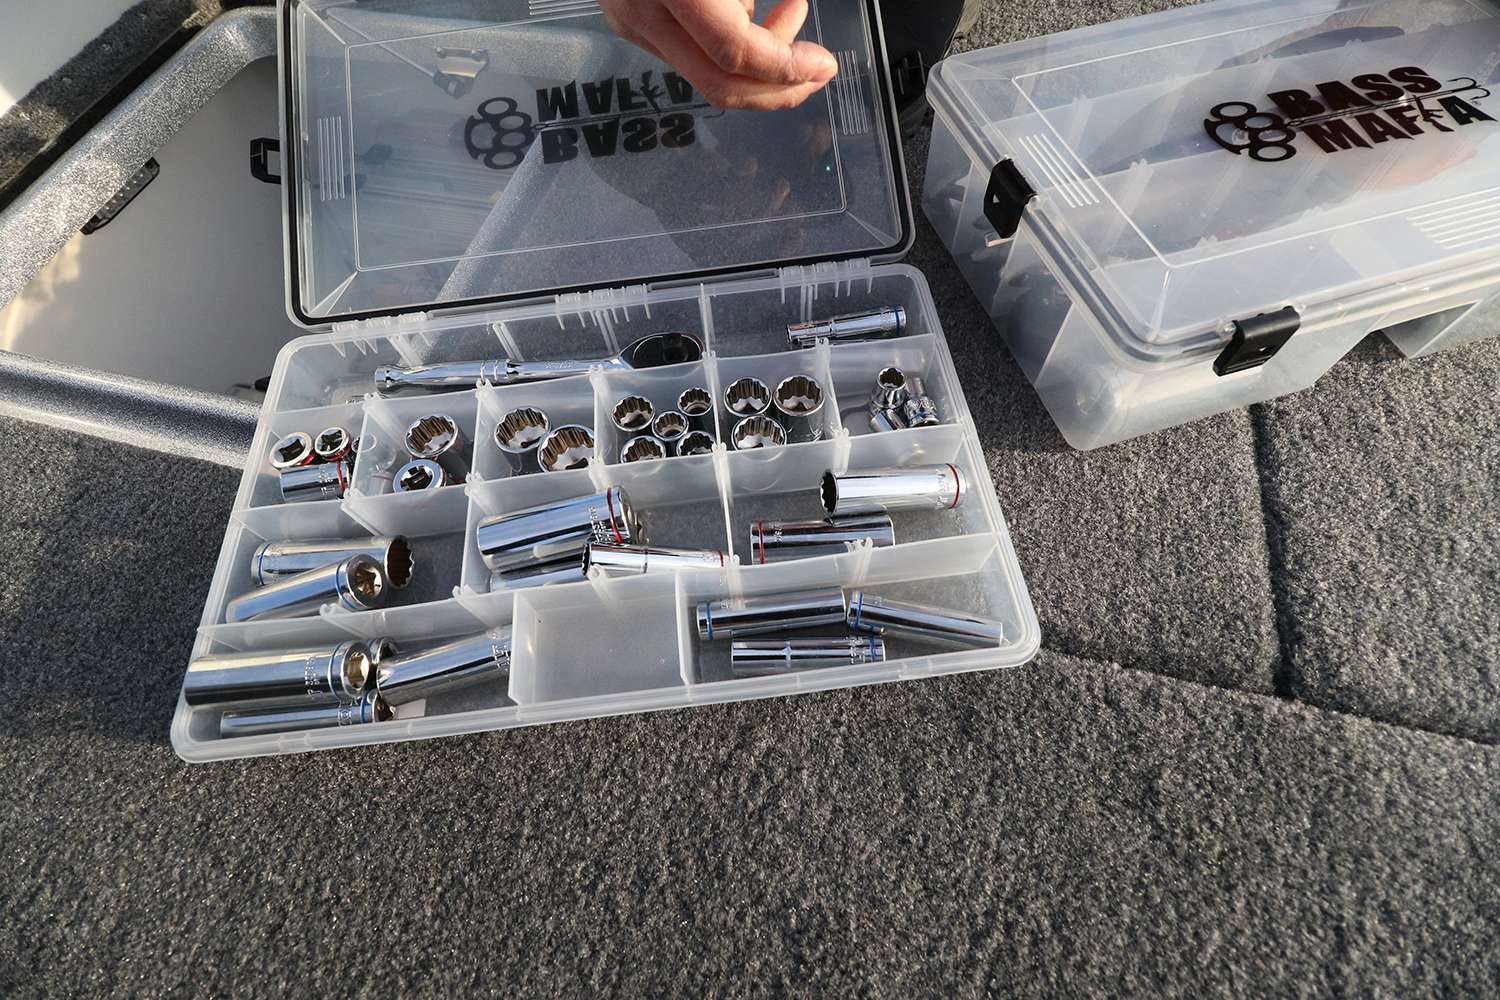 A Bass Mafia box of sockets is almost a must in every bass boat. You never know when you're going to need tools like this, but having them on-hand could mean the difference between making it back to weigh in or not. Lefty lucy, righty tighty.